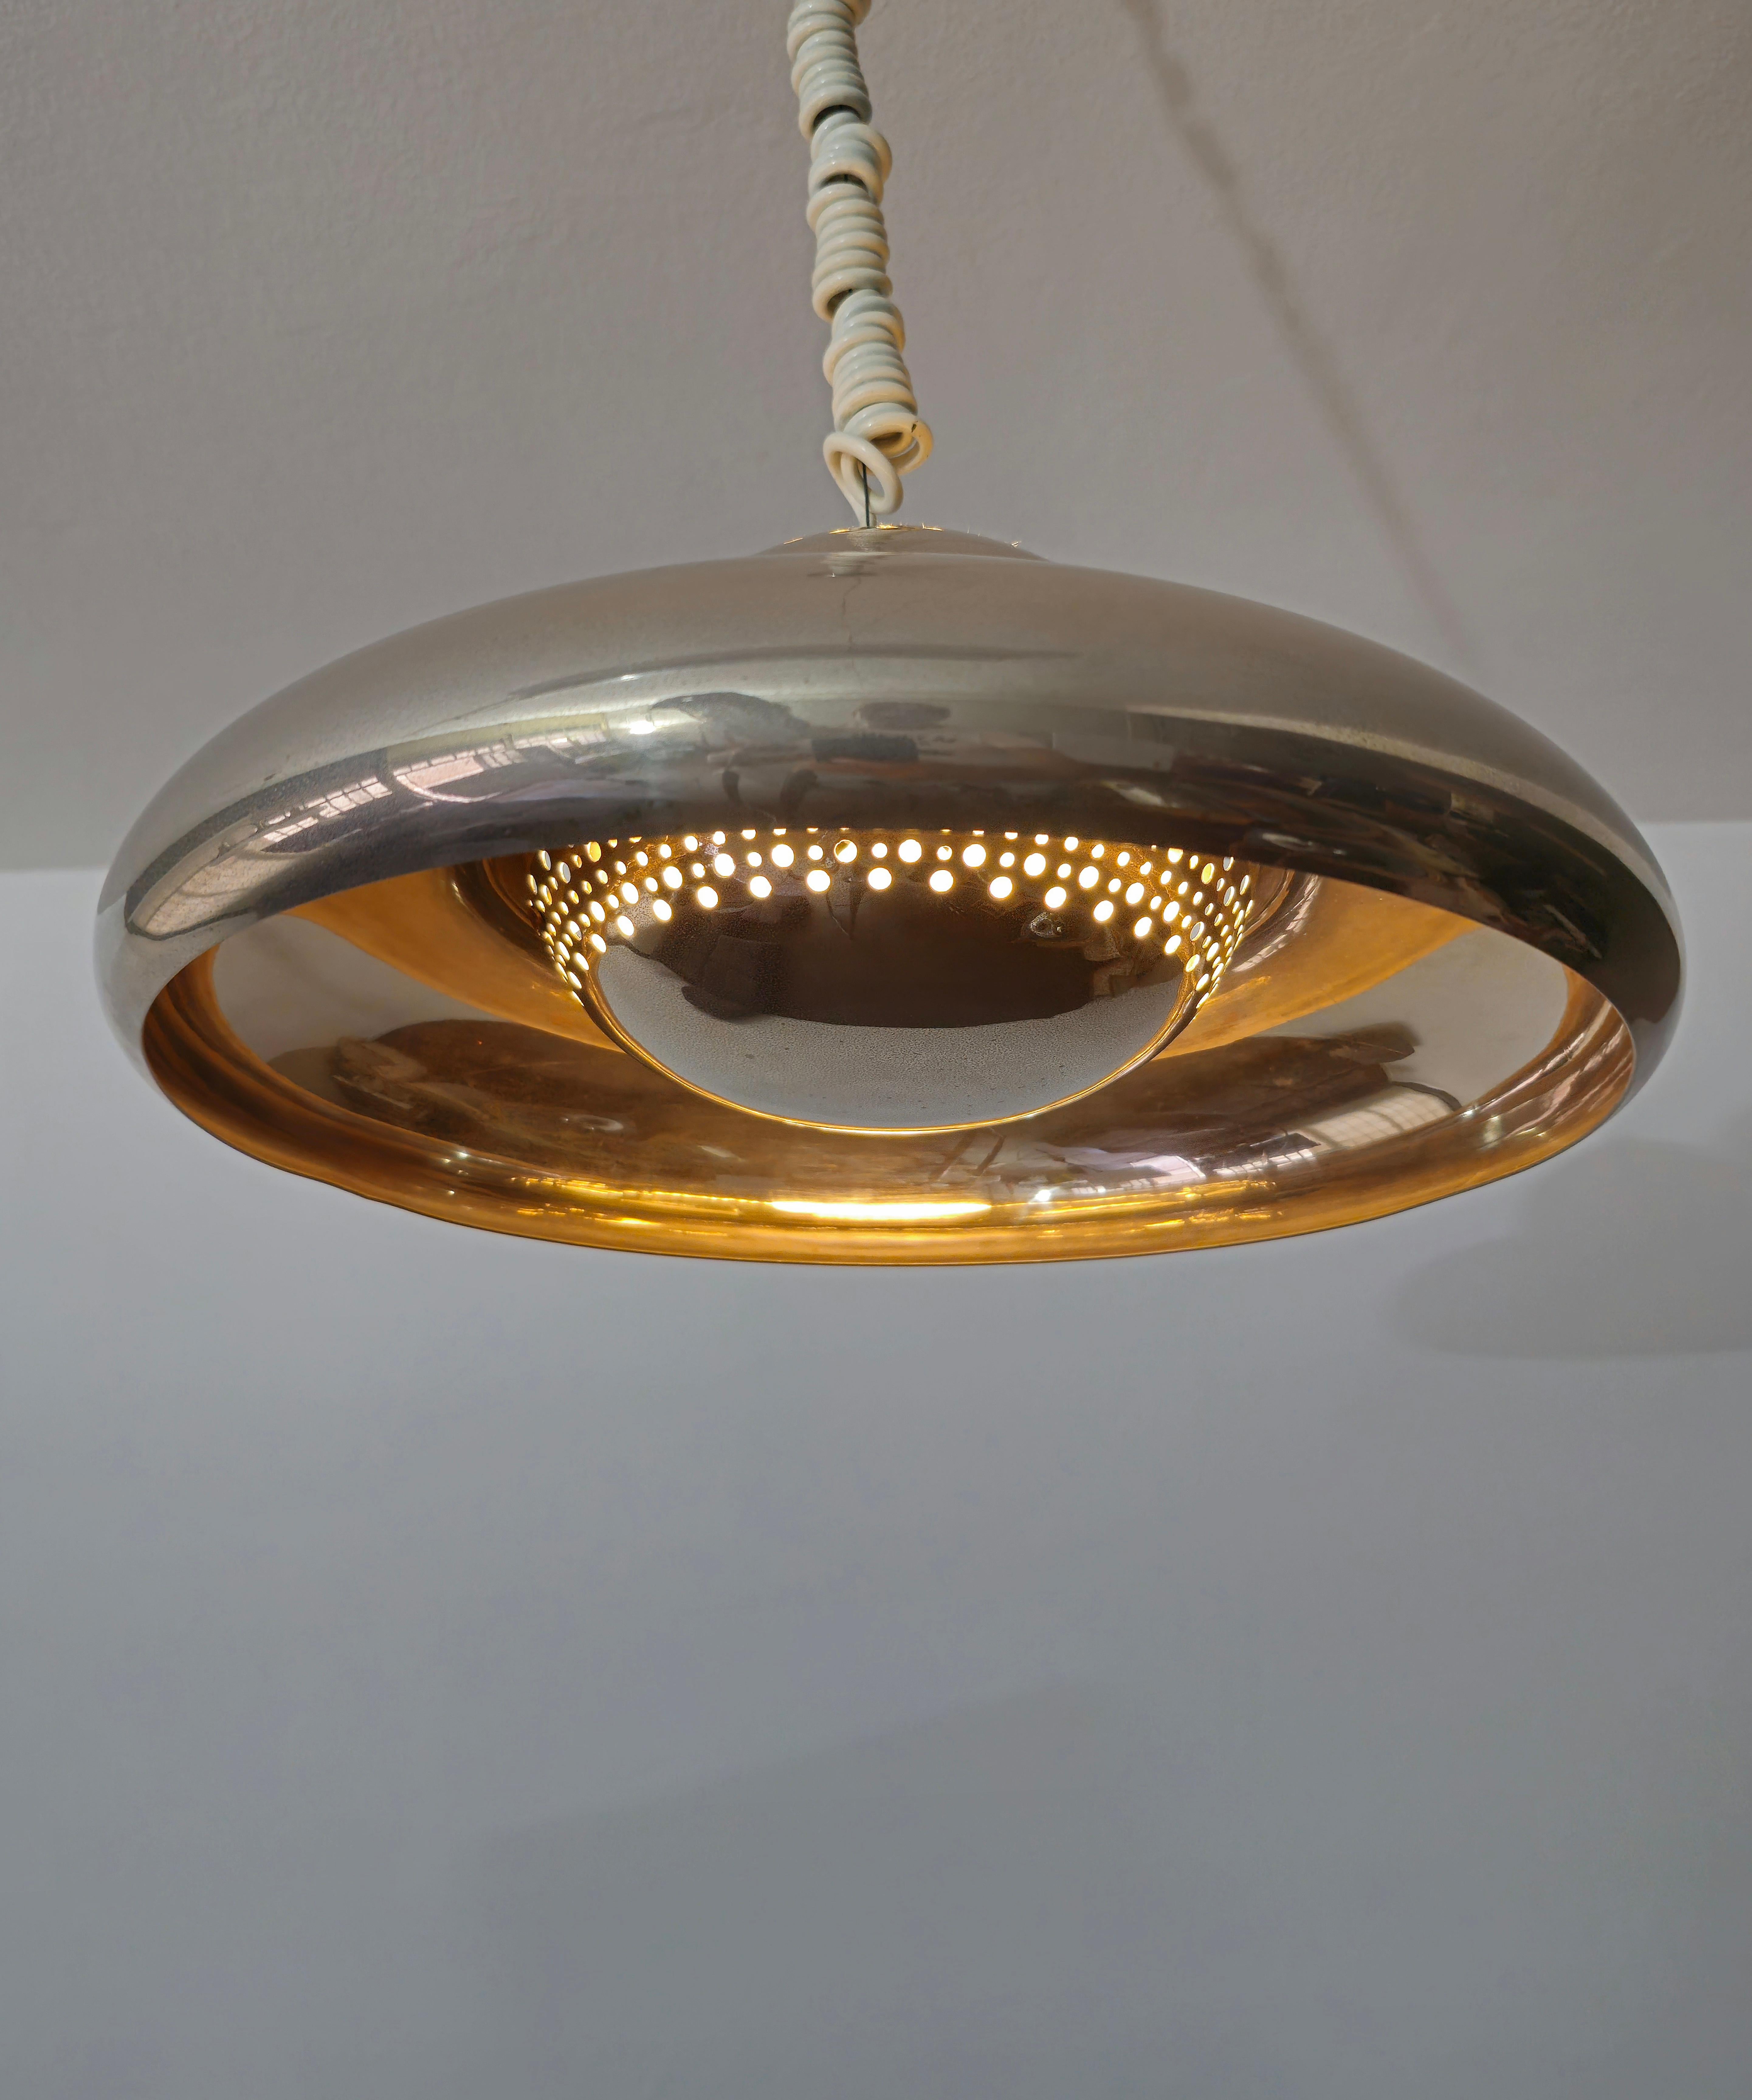 Pendant Afra and Tobia Scarpa for Flos Nickel-Plated Brass Midcentury Italy 1960 For Sale 3